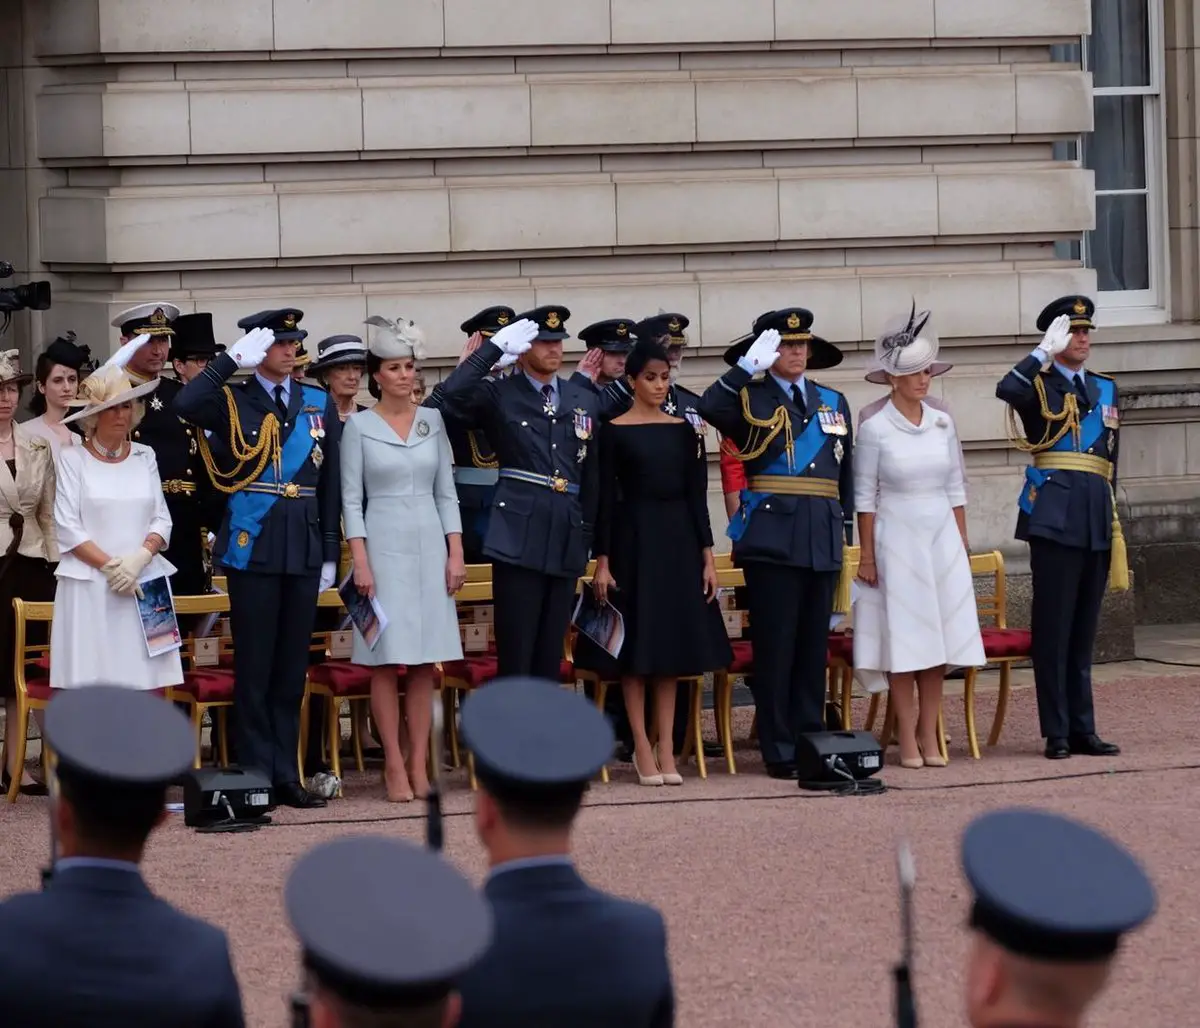 The Duchess of Cambridge’s surprise appearance at RAF Centenary Service